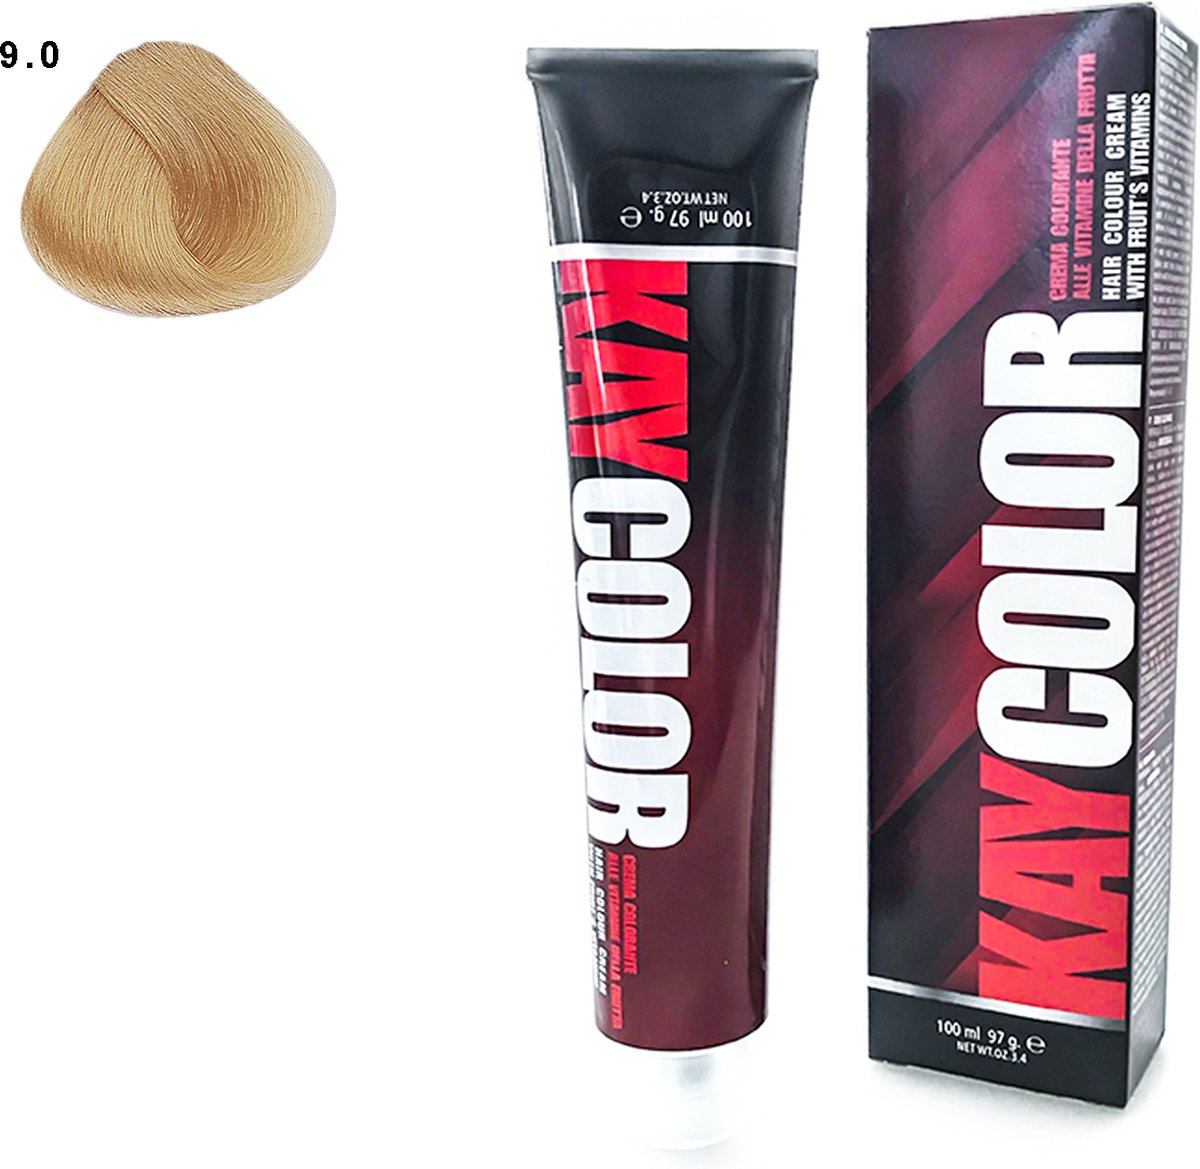 Kay Color - Kay Color Hair Color Cream 100 ml - 9.0